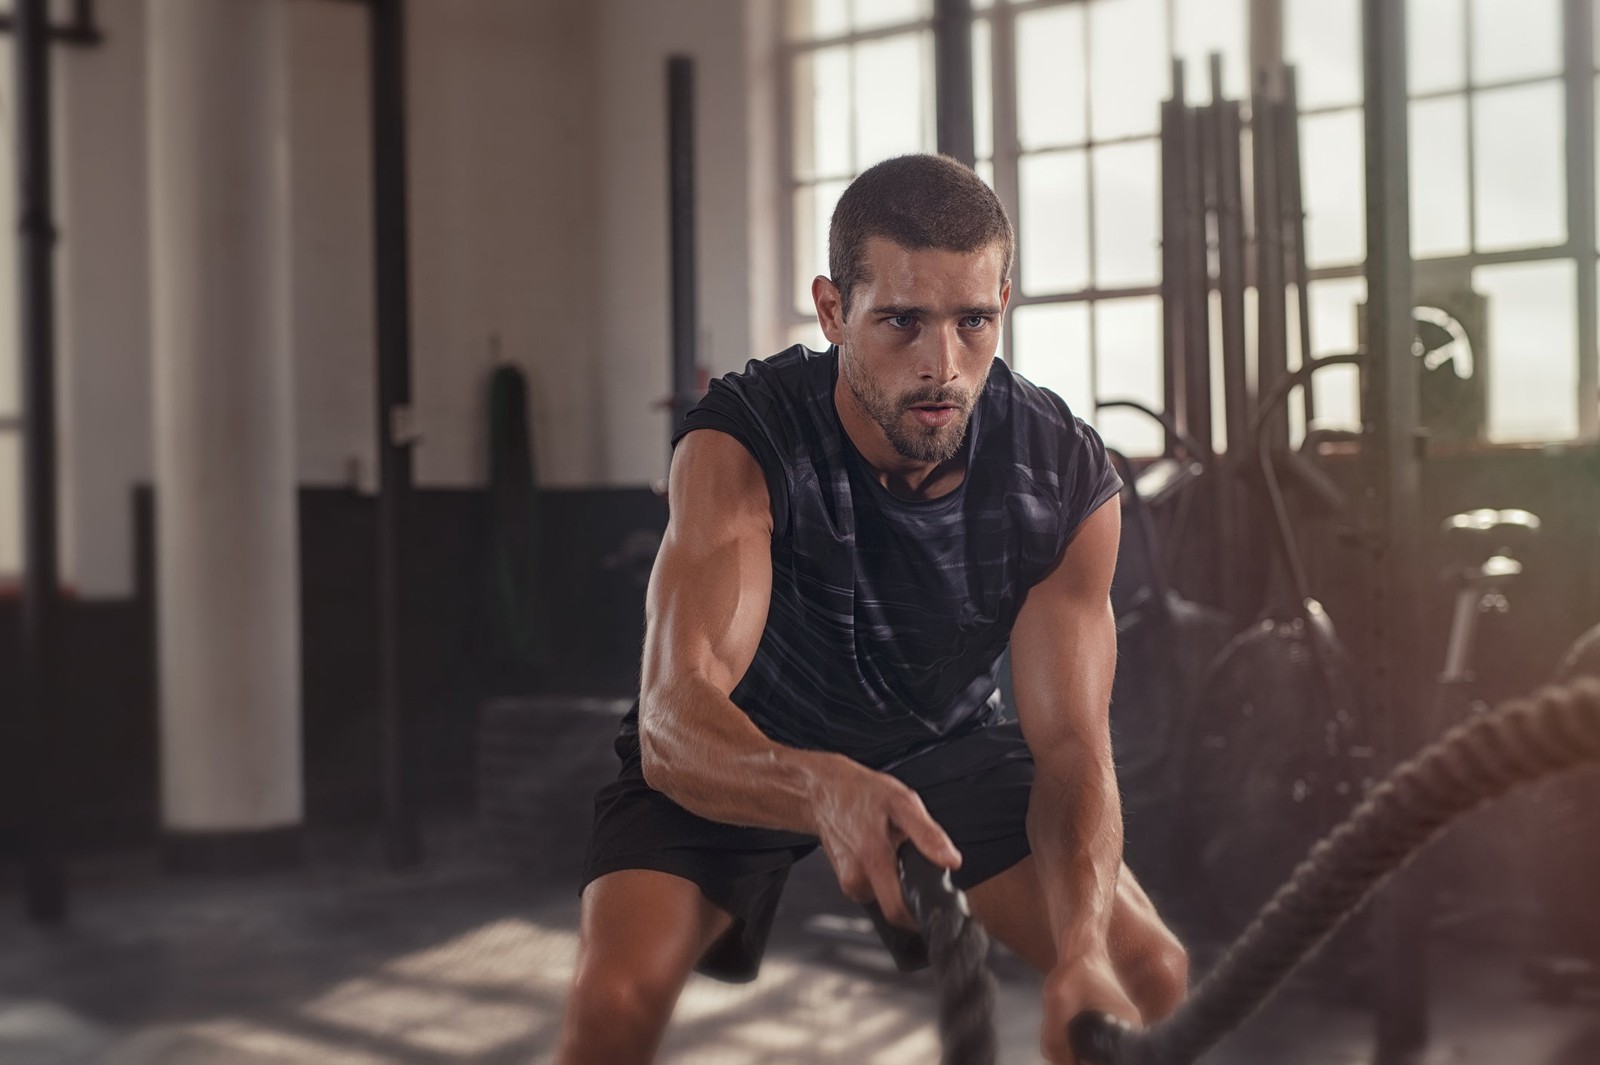 Every Answer to This Quiz Is Either Heaven 💫 or Hell 🔥 – Can You Make the Right Choices? Sporty Athletic Man Working Out At Gym